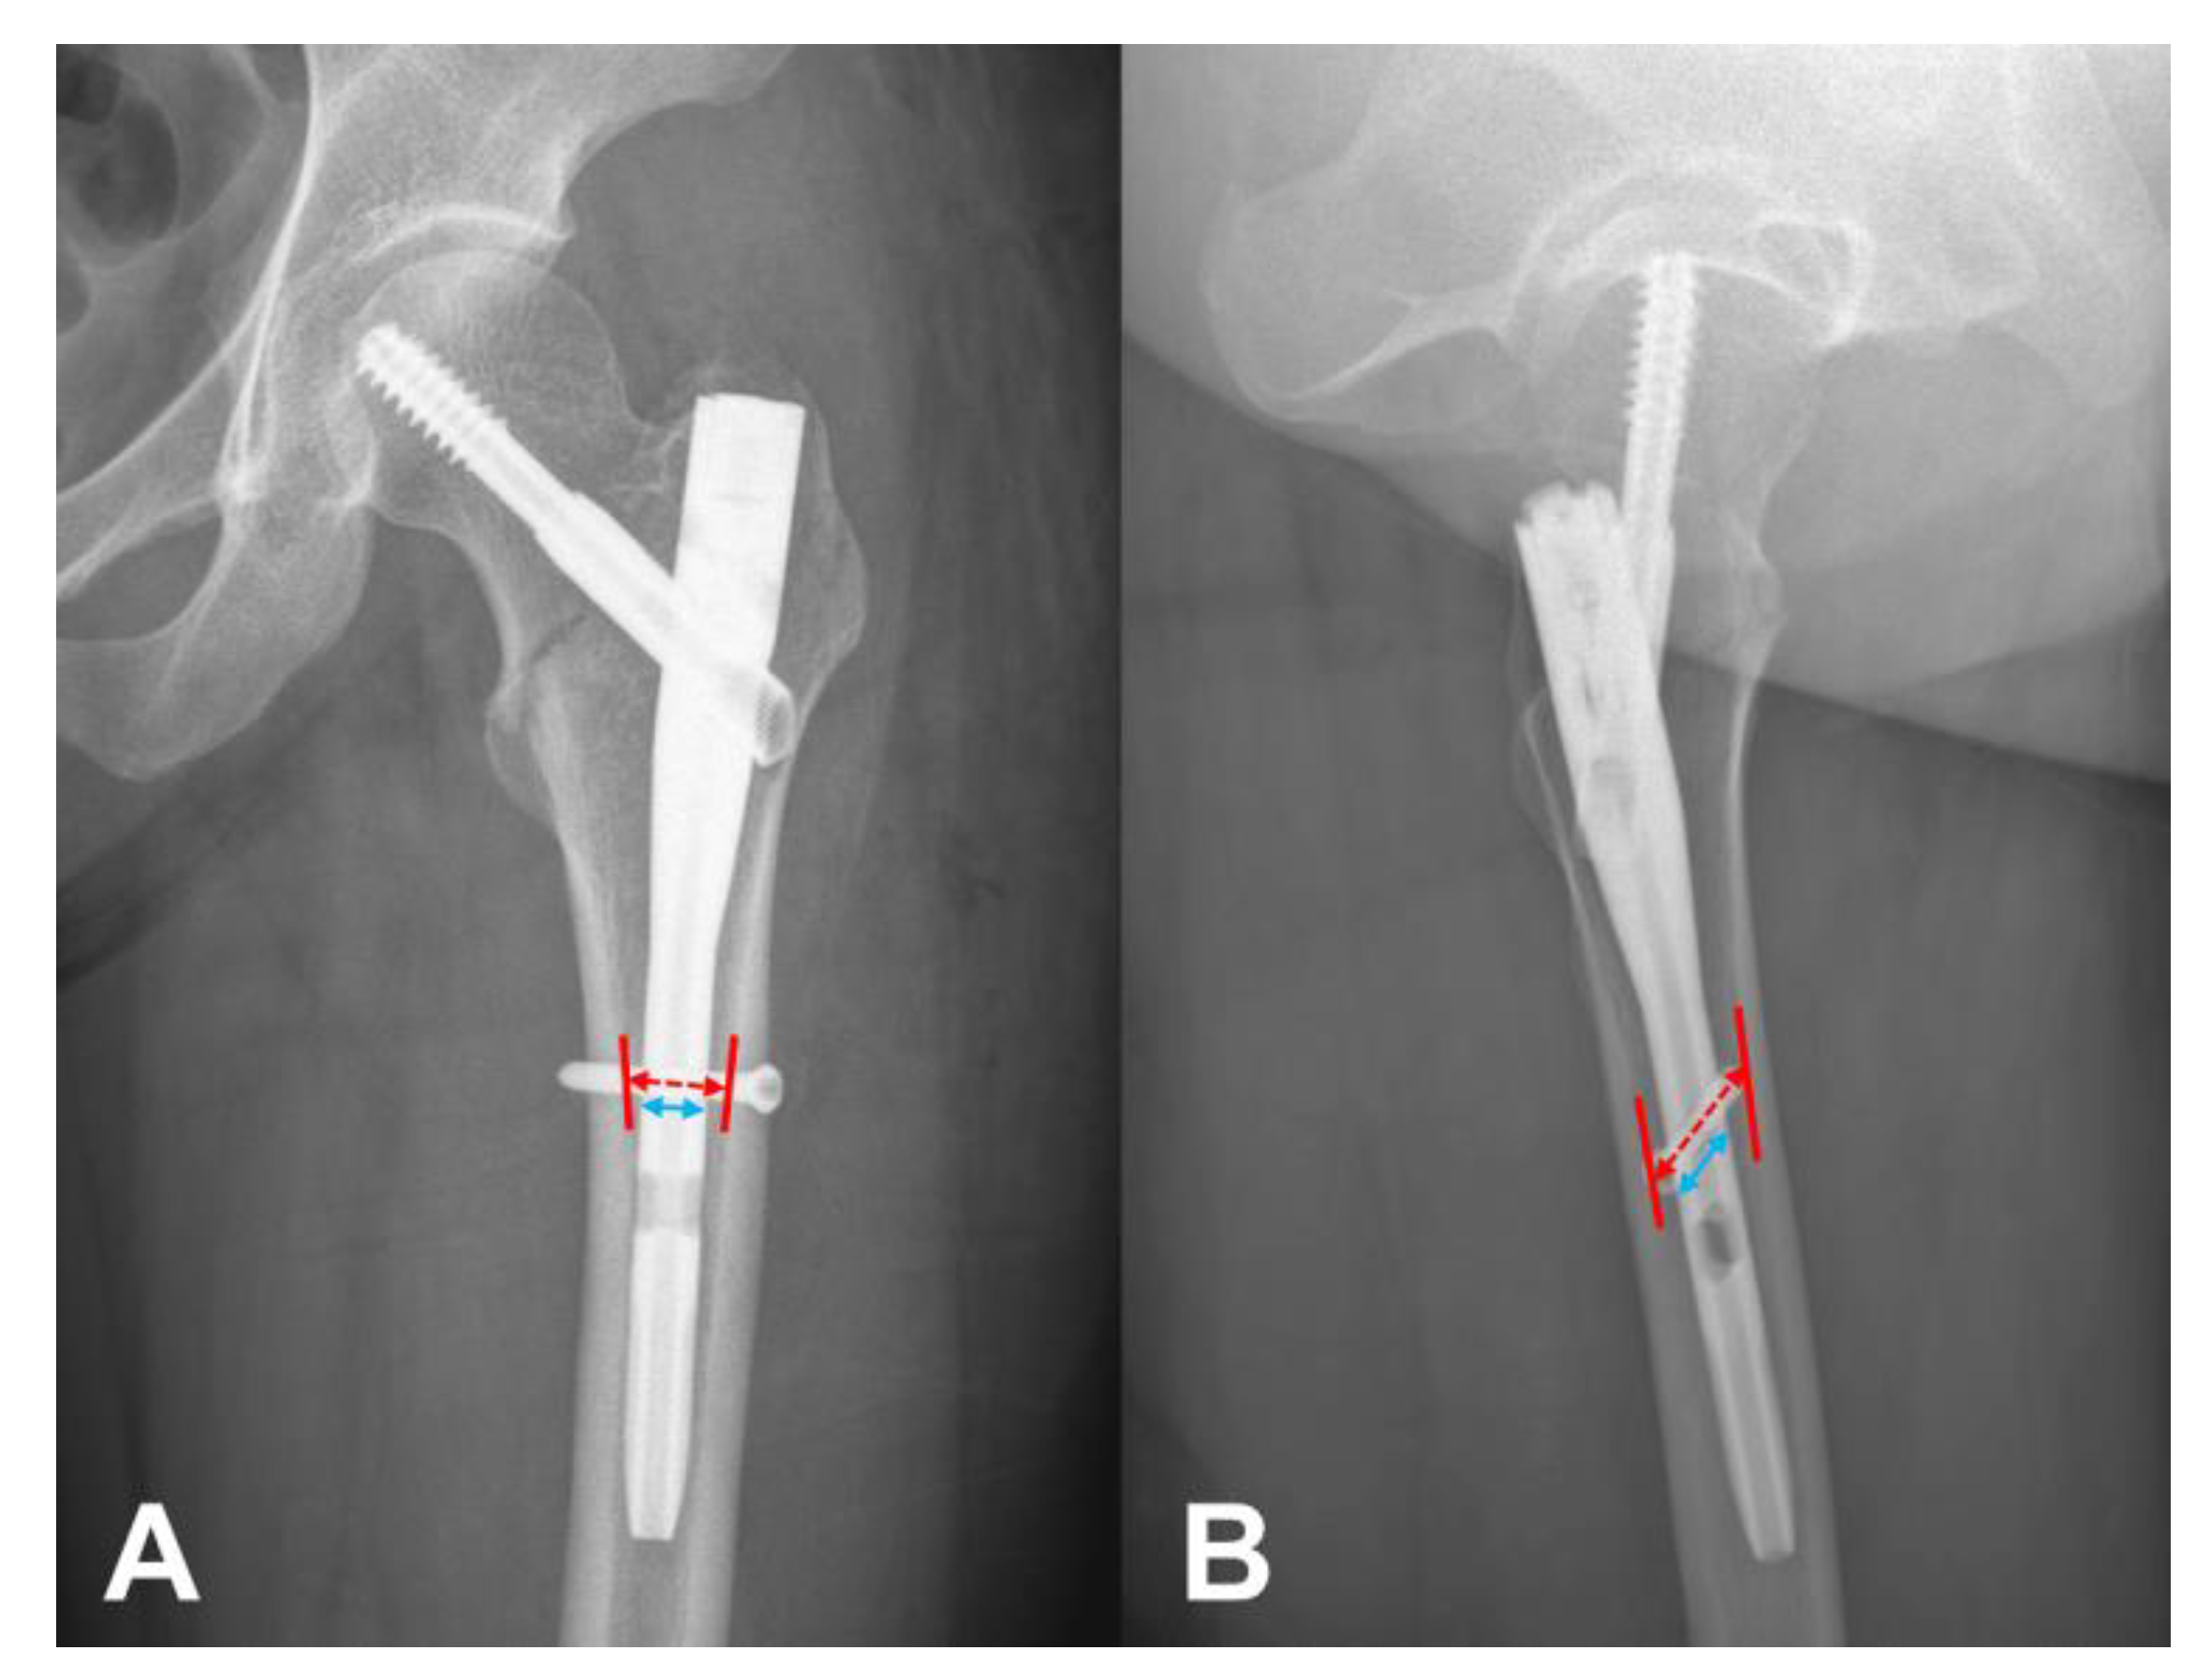 Right Leg Surgical Fixation of Femur Fracture with Placement of Intramedullary  Rod | Doctor Stock